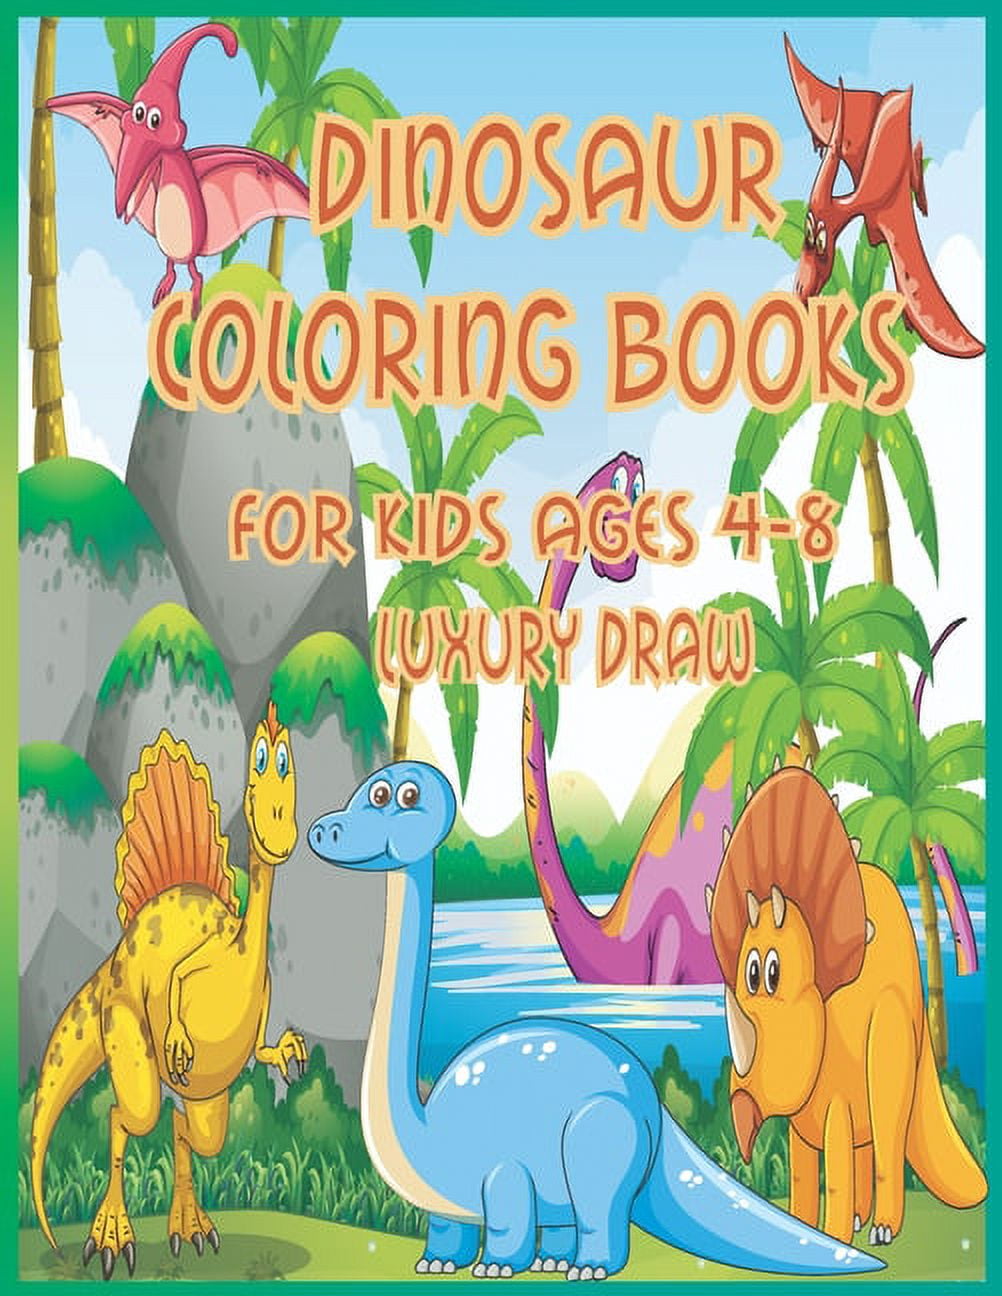 How To Draw Dinosaurs for Kids: Learn to Draw for Kids Ages 4-8